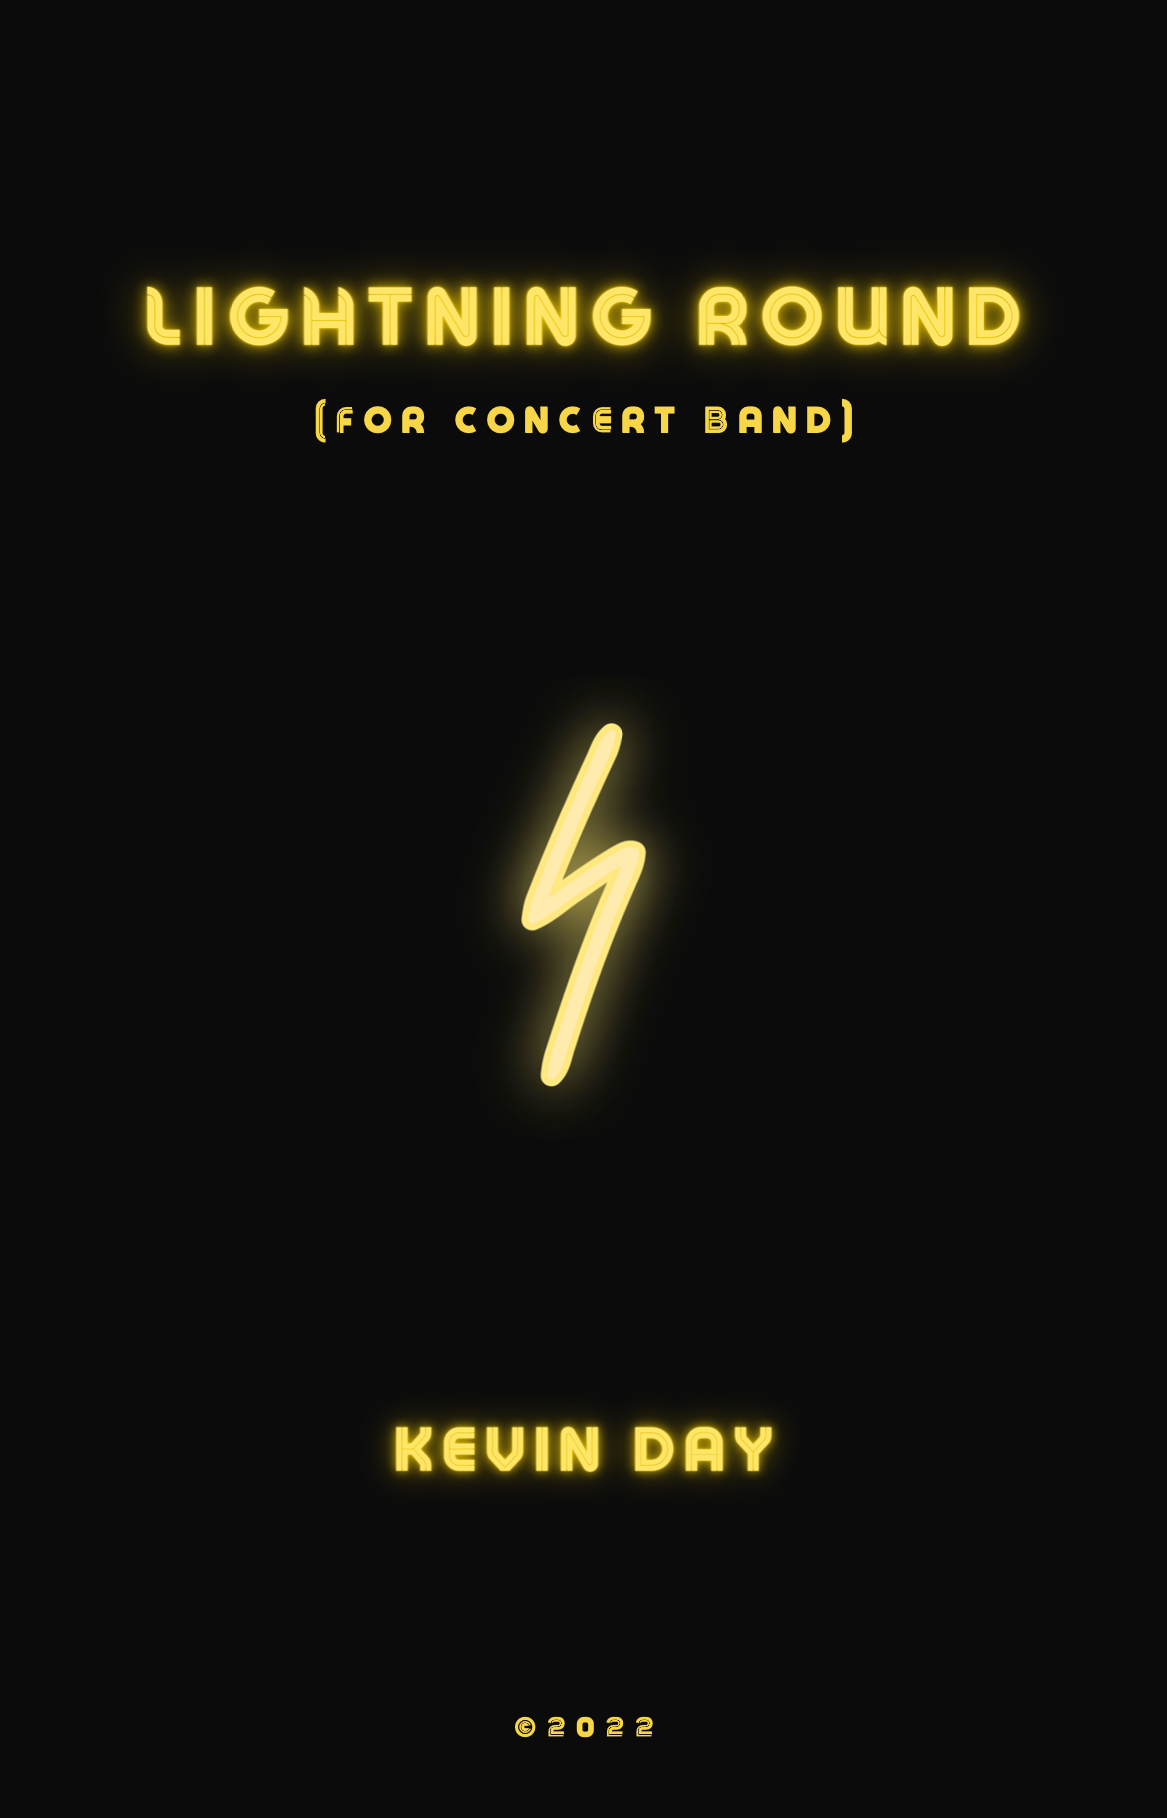 Lightning Round (Score Only) by Kevin Day